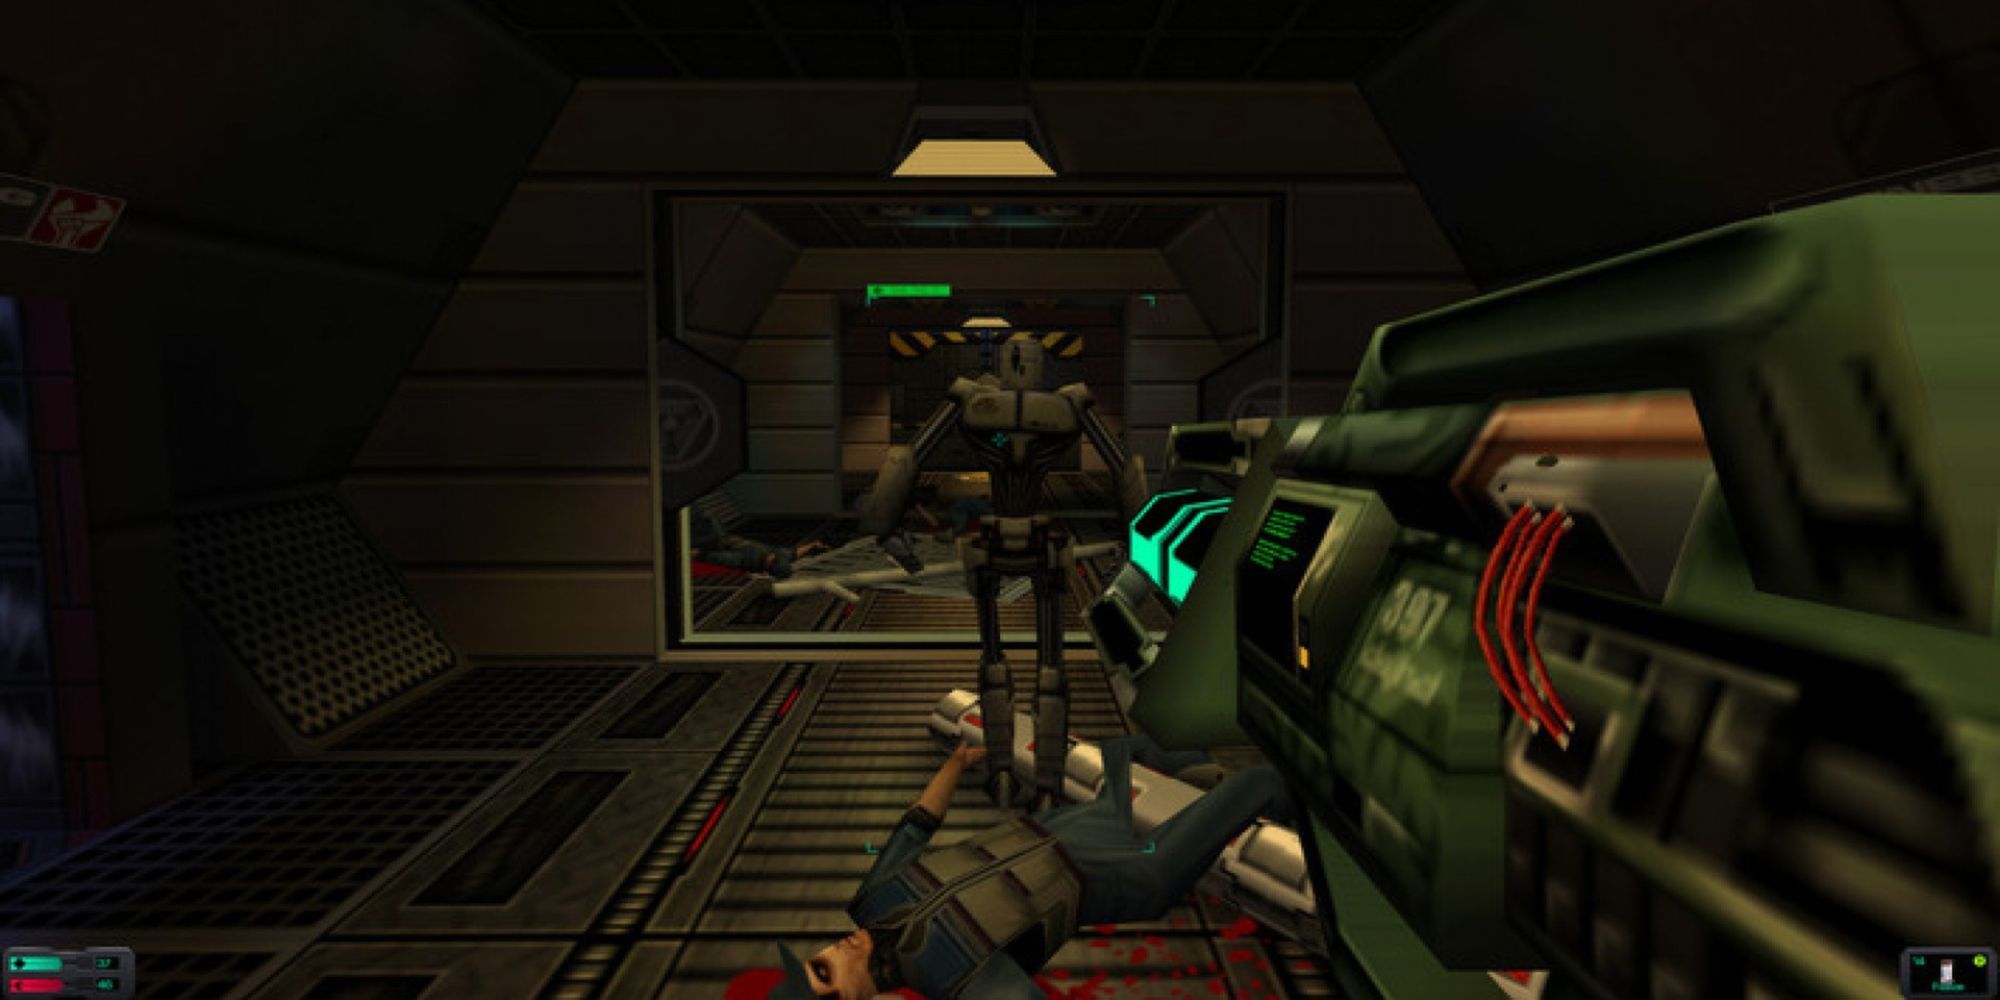 A player aiming at an enemy in front of him in System Shock 2